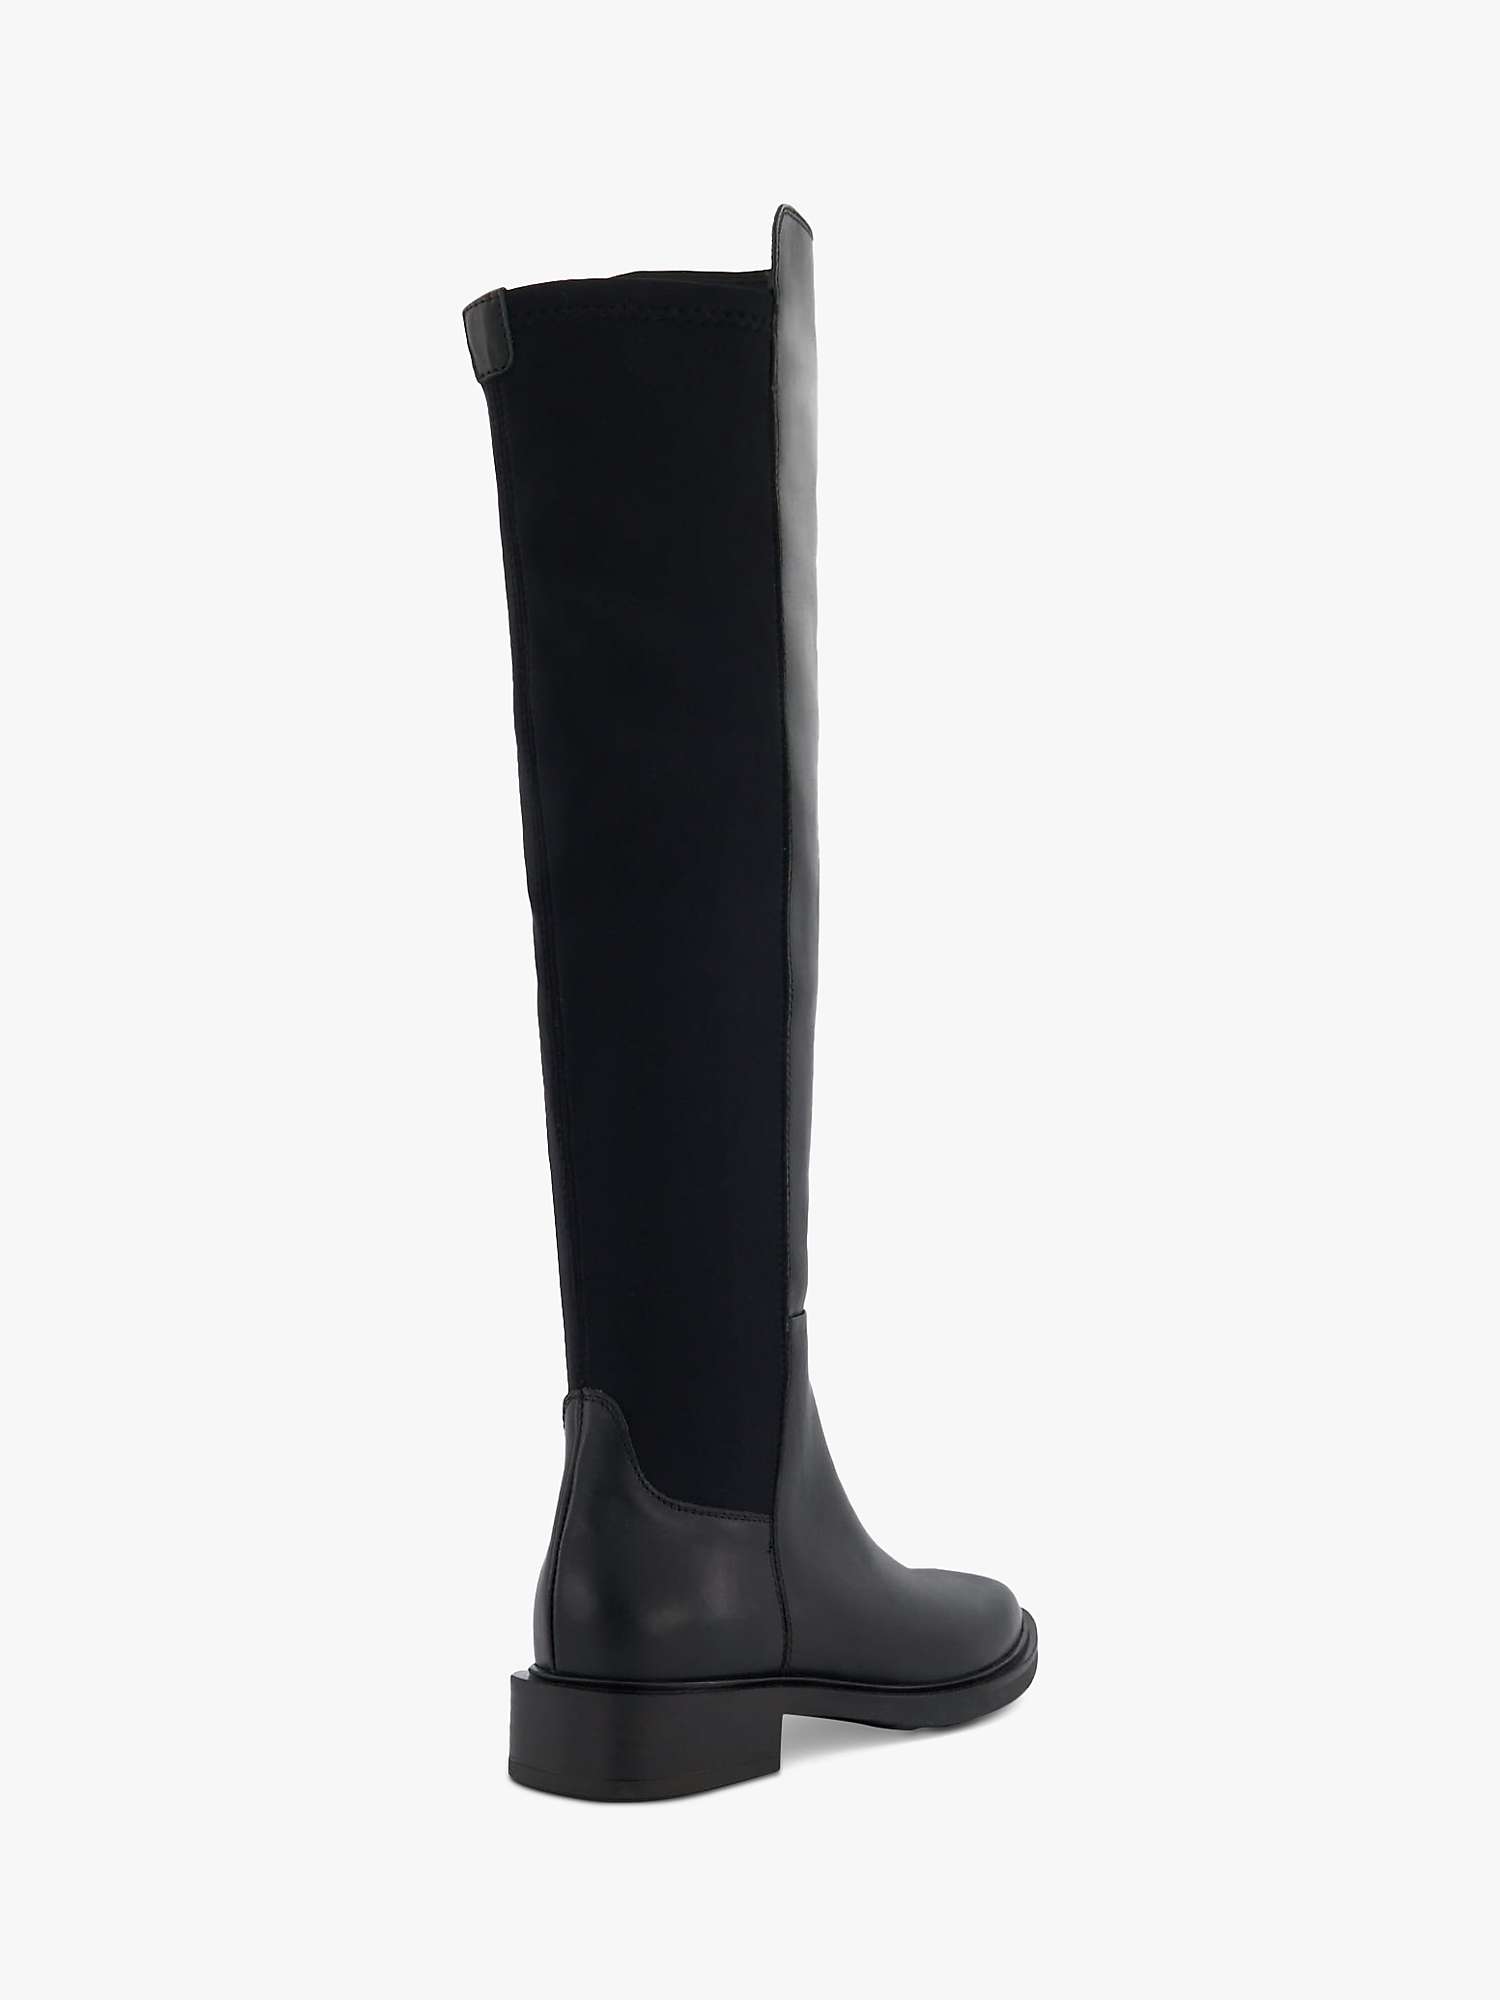 Buy Dune Text Leather Knee High Boots, Black Online at johnlewis.com